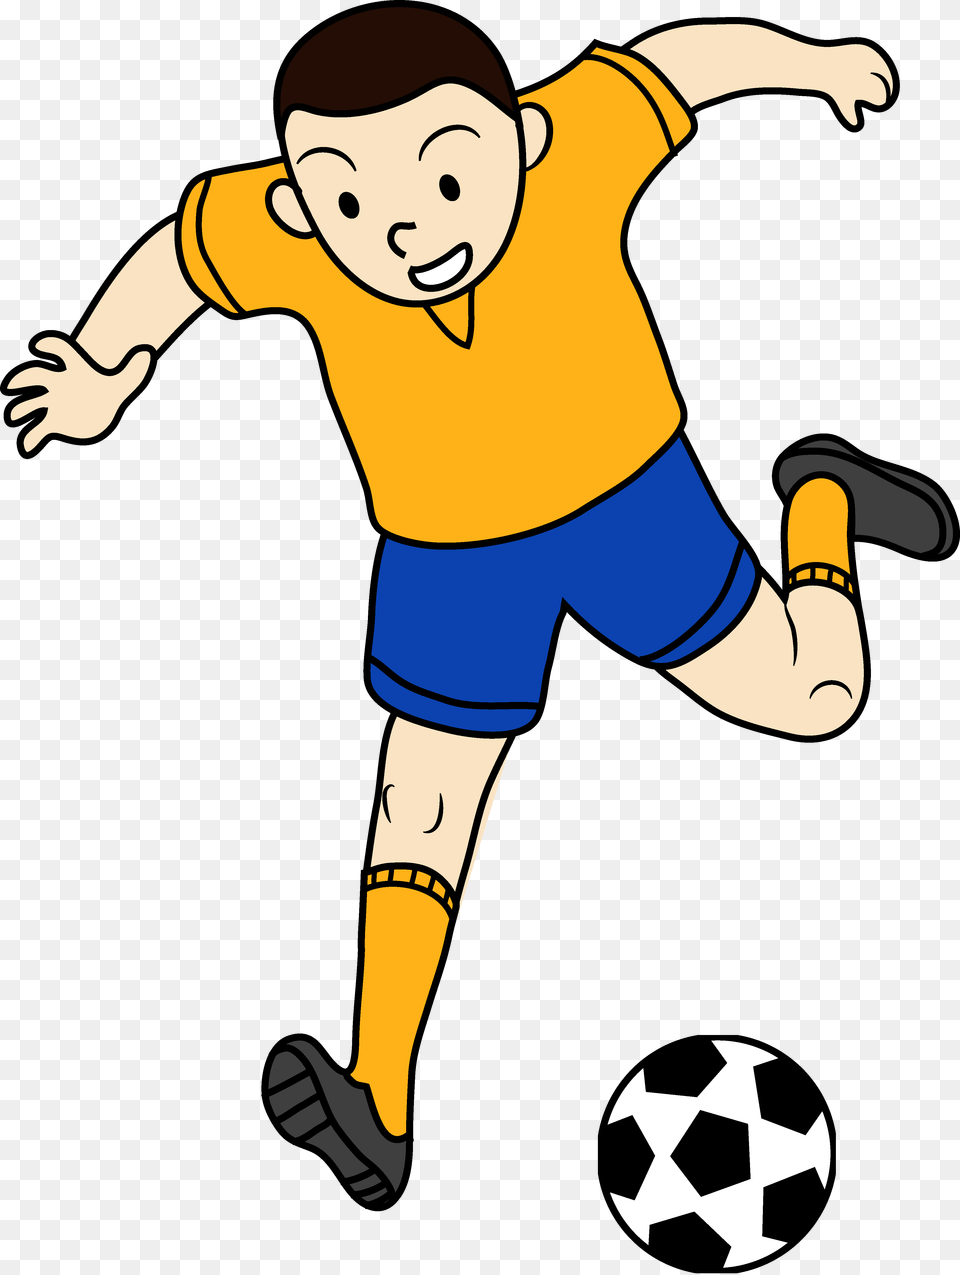 Clip Art Of Kid Playing Soccer Candy Corn Clip Art, Kicking, Person, Clothing, Shorts Free Png Download